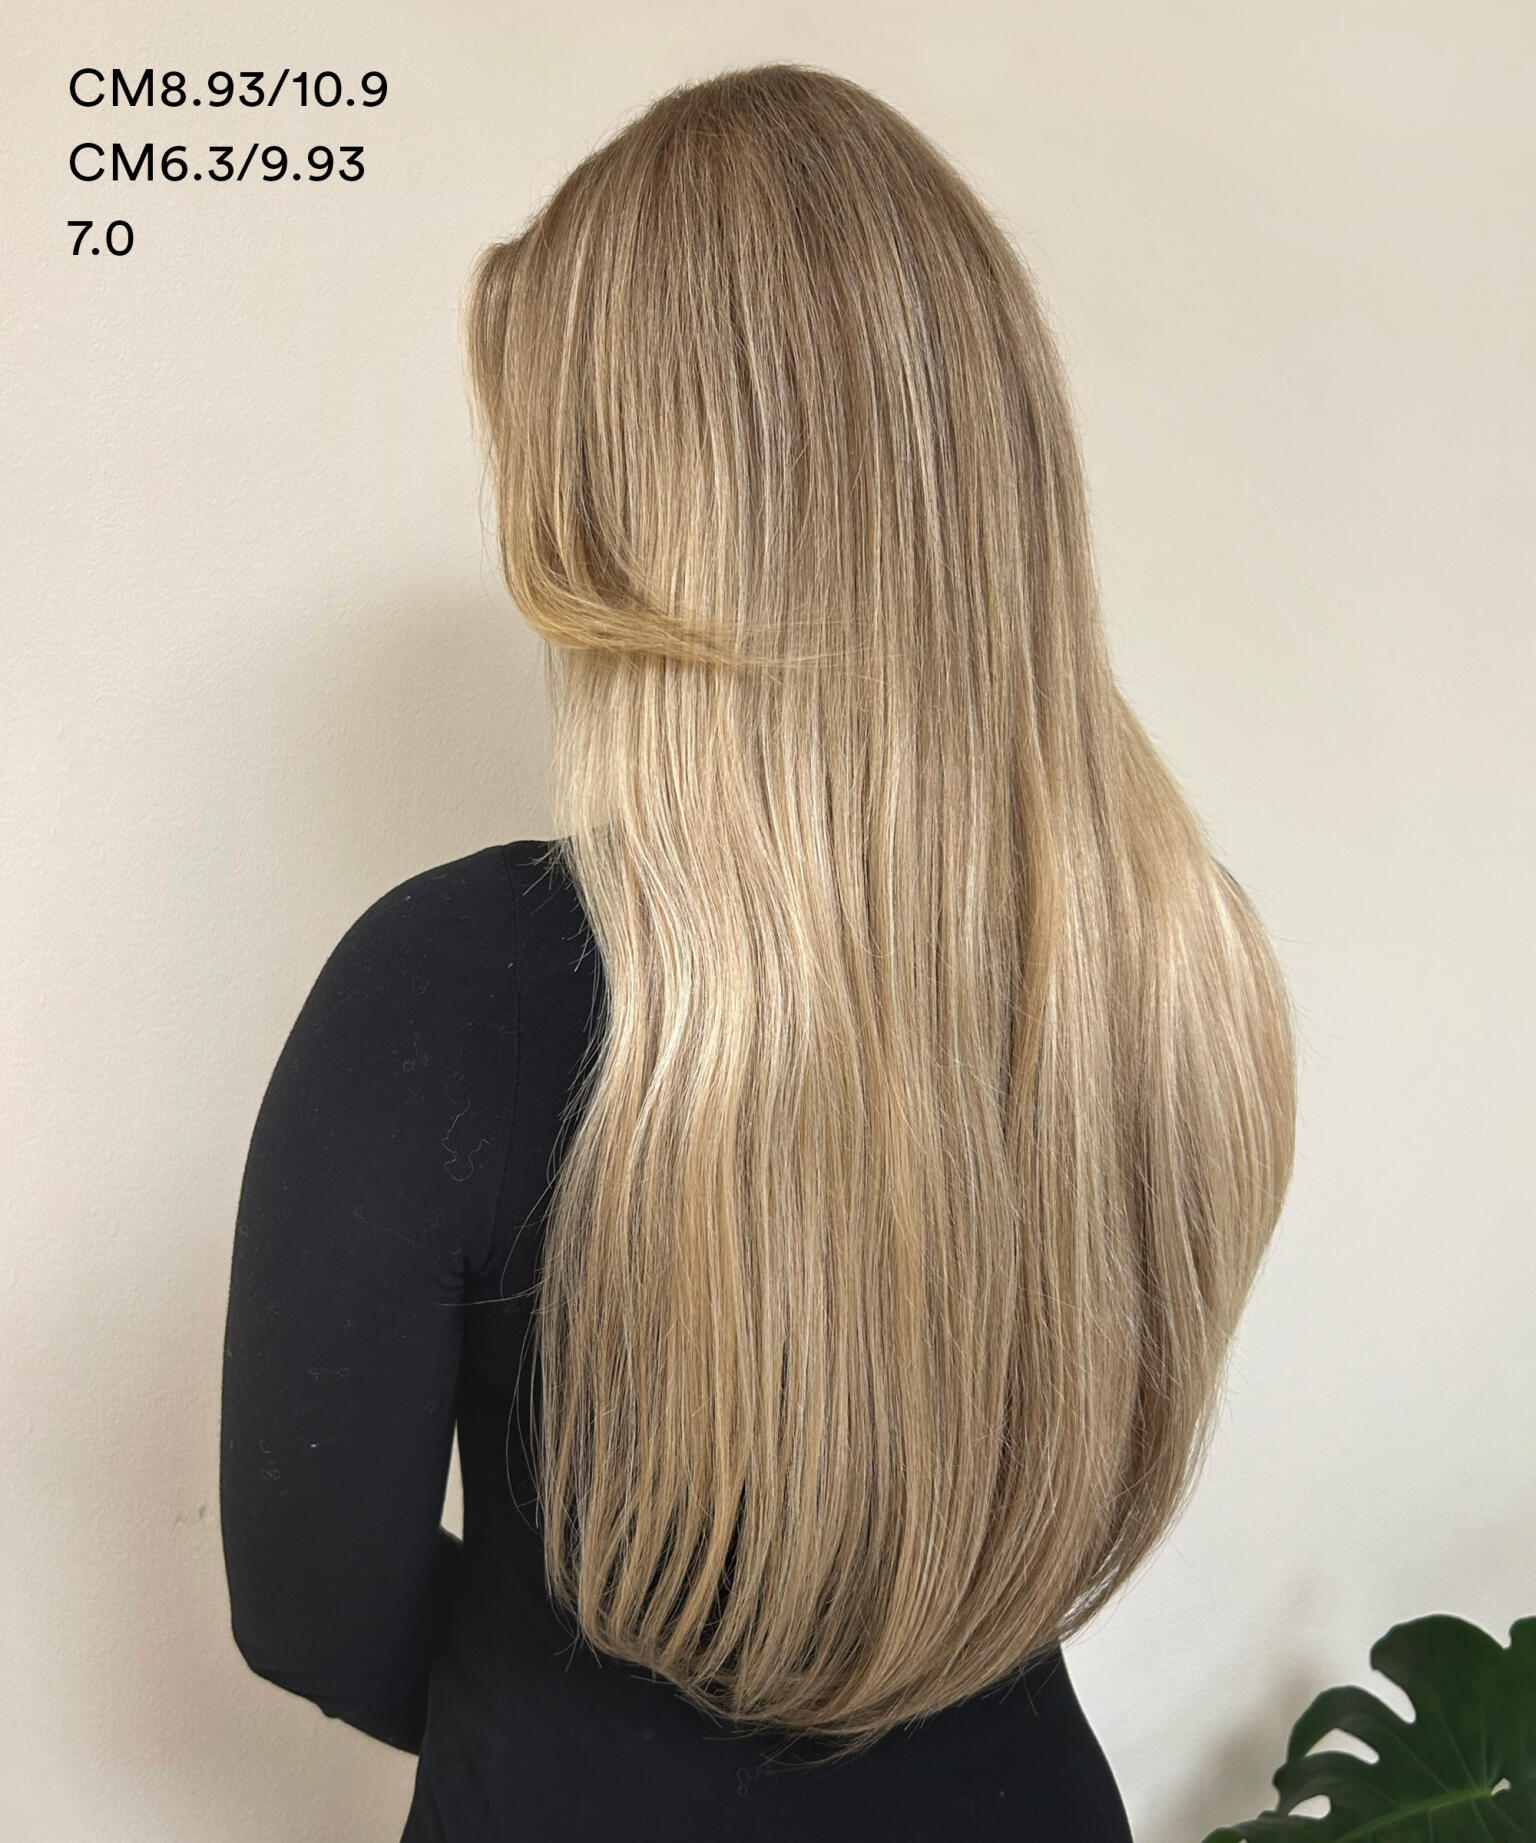 Luxe Tape Extensions Seamless 3 CM6.3/9.93 40 cm